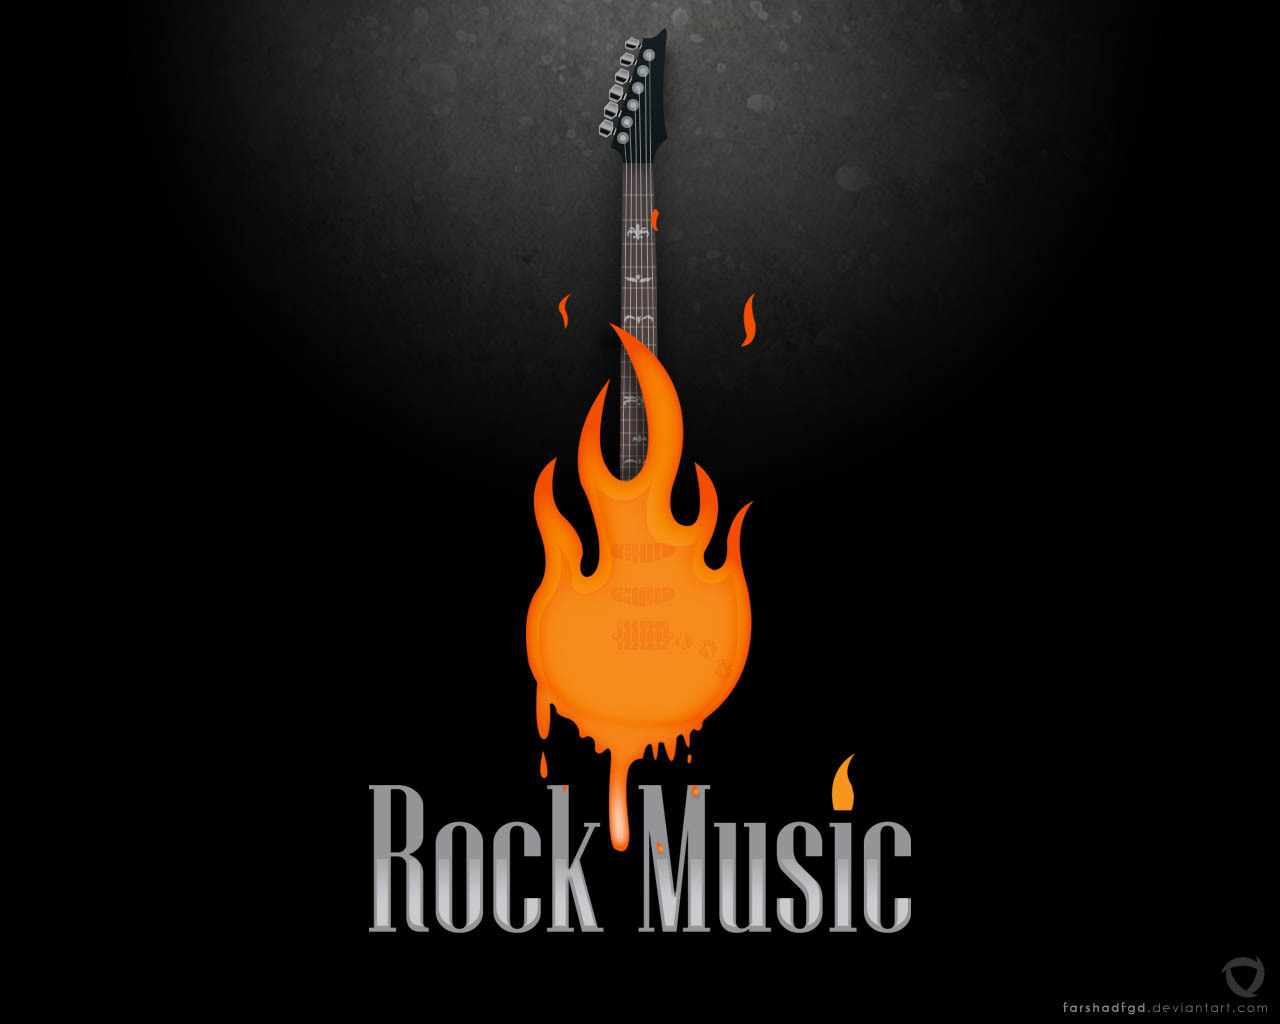 rock music images rock HD wallpaper and background photos 17211271